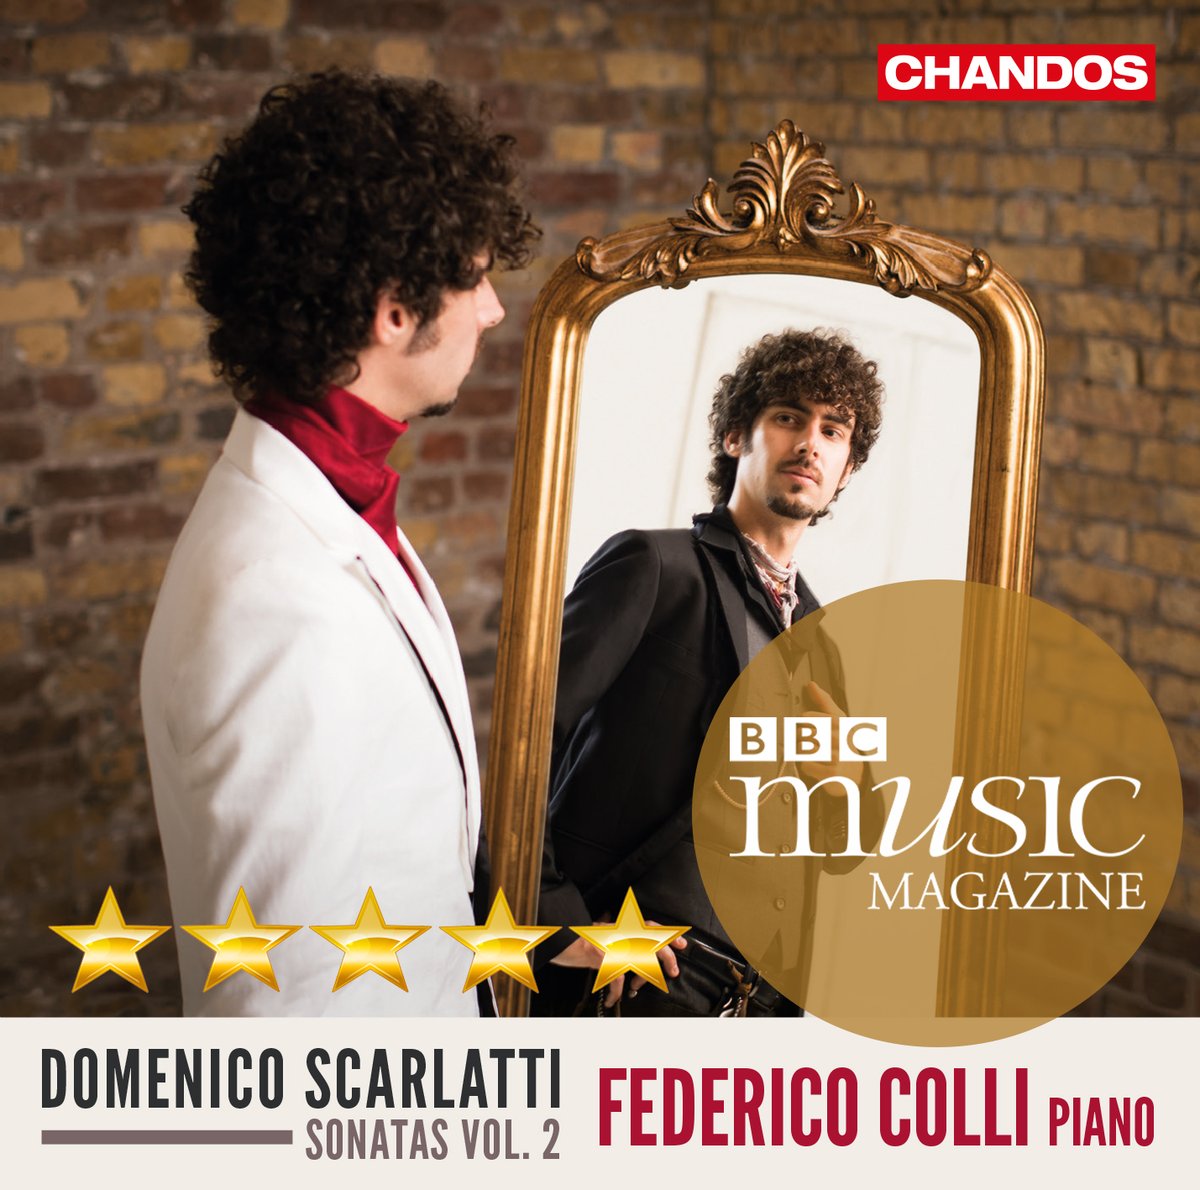 Scarlatti Sonatas Vol. 2 from @Federico_Colli is BBC @MusicMagazine's Recording of the Month! 'Colli's springy touch throughout is marvellously responsive.. if he records all 555 sonatas, I will be in the queue to get them' lnk.to/fcscarlatti2 bit.ly/2Usq623